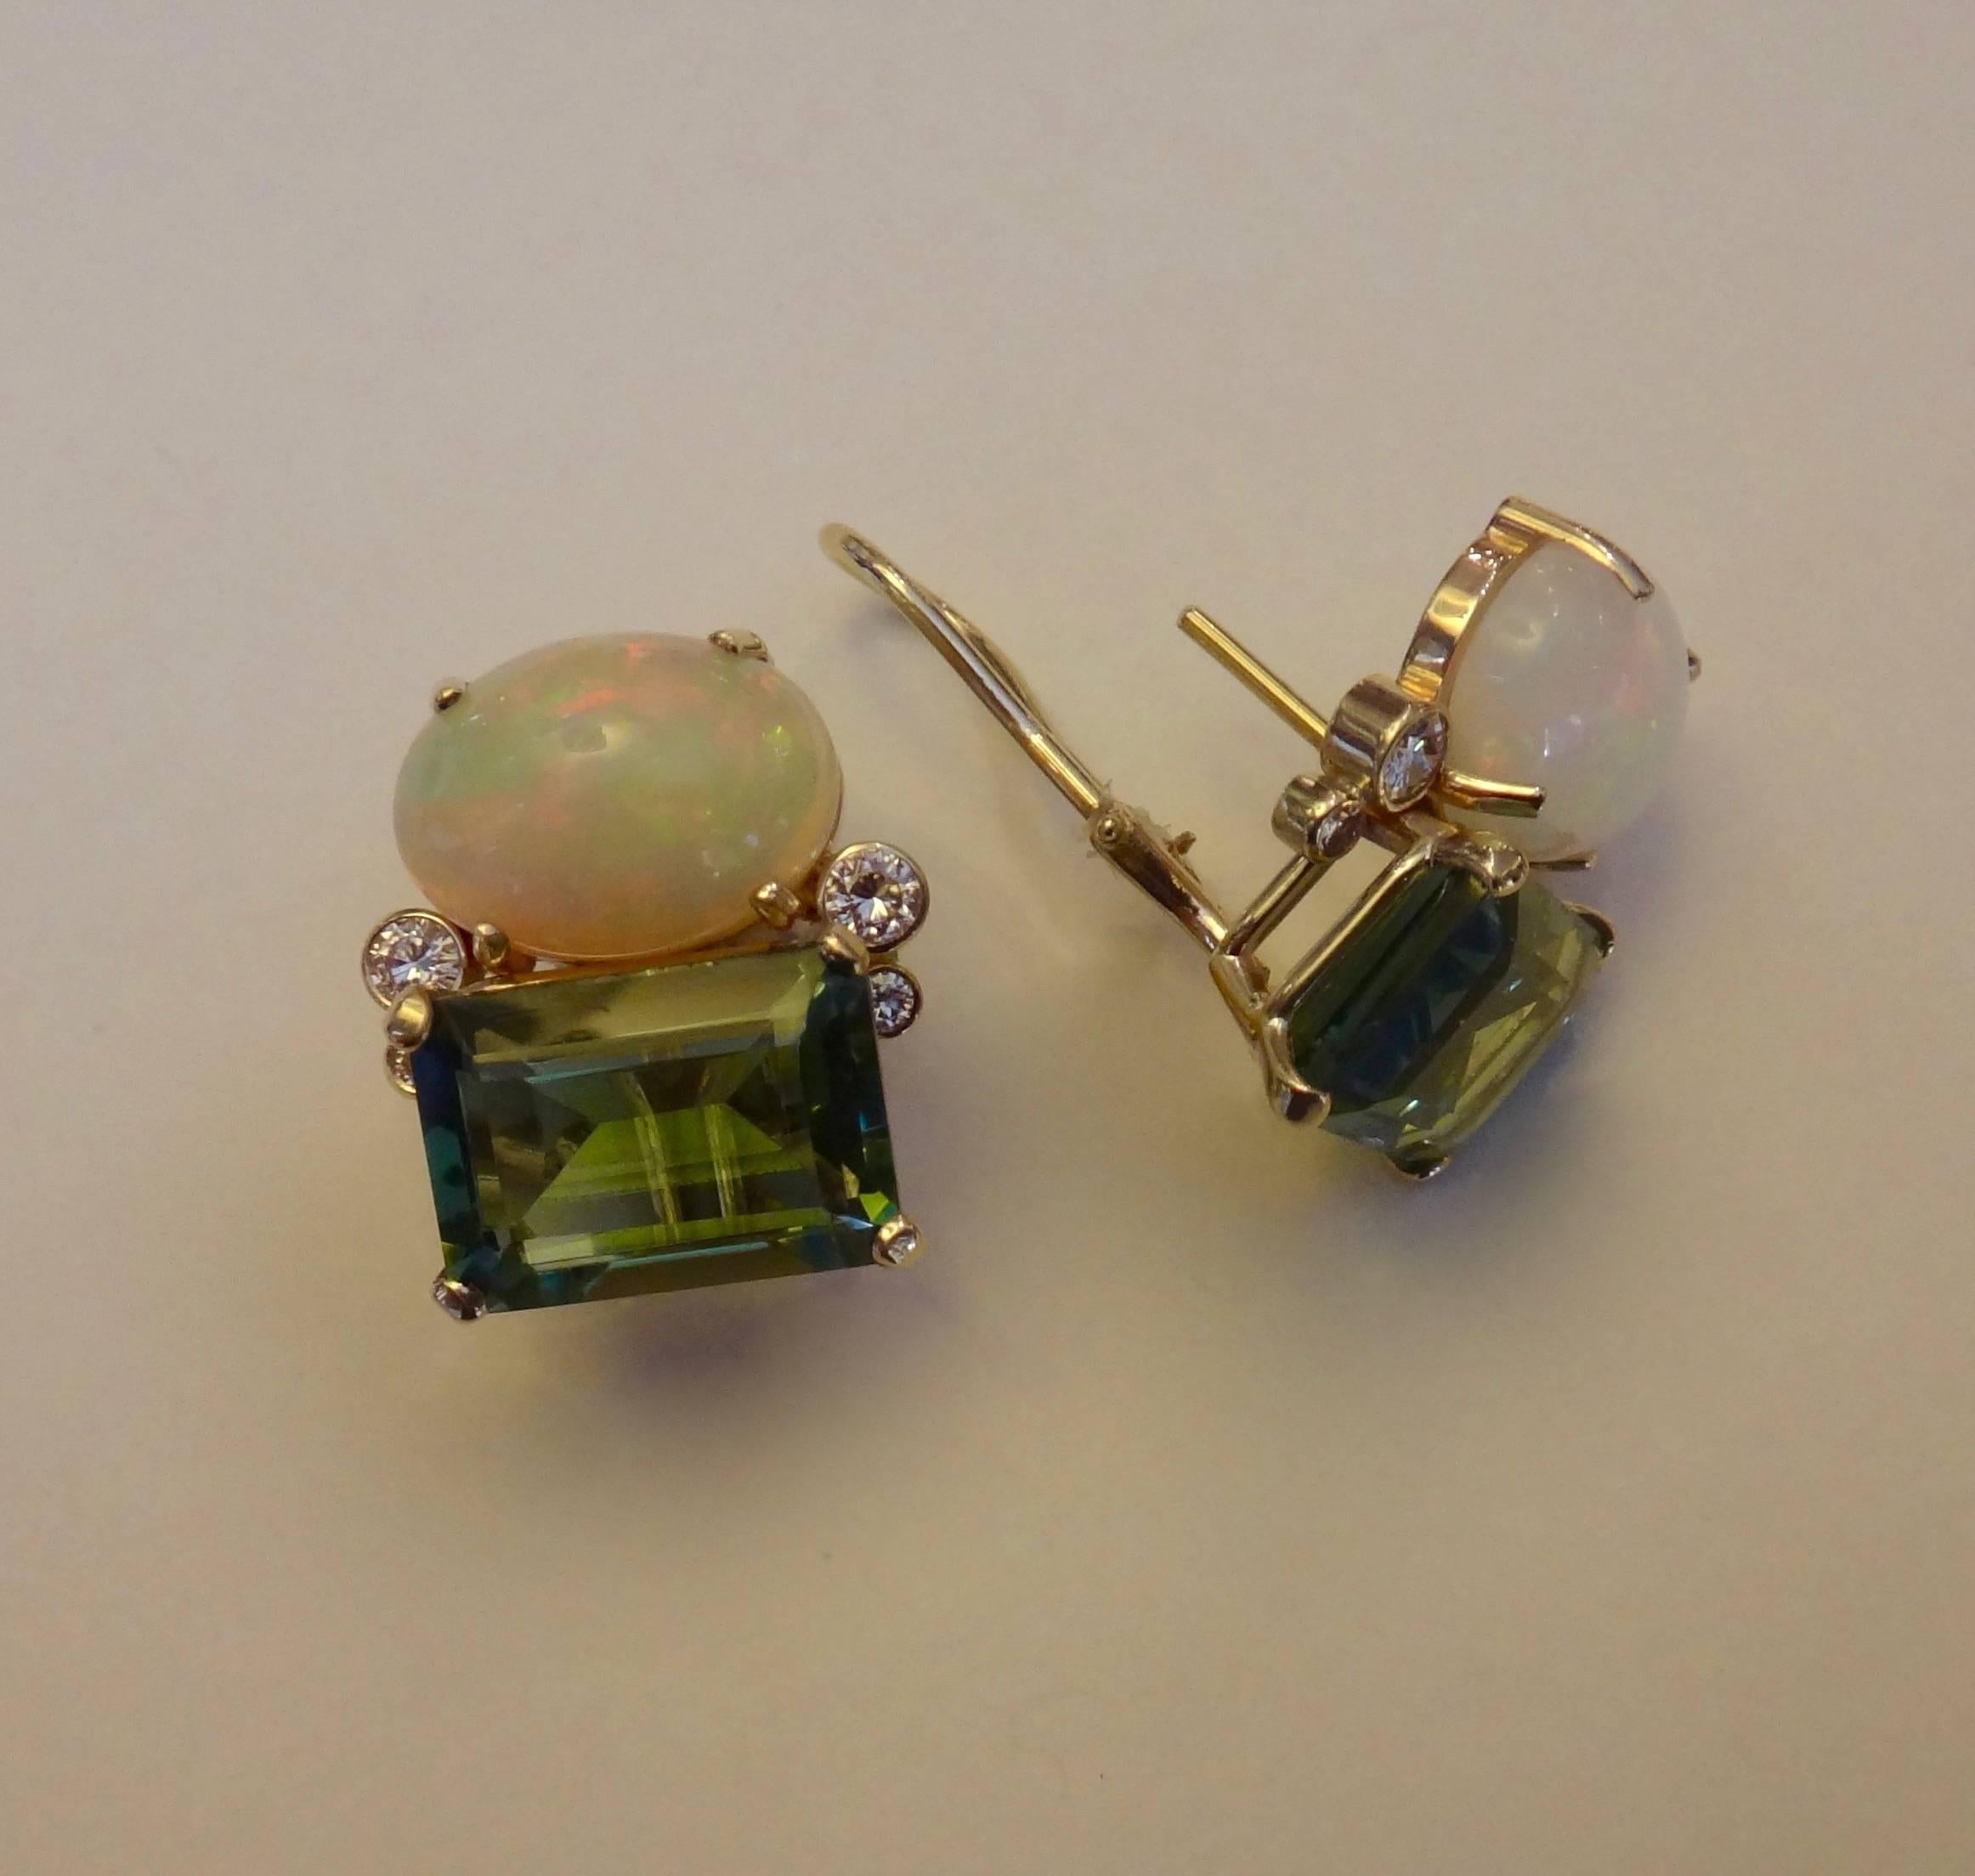 A lively pair of cabochon opals originating from Ethiopia are paired with emerald cut green beryls and further accented with diamonds in these "Due Pietra" earrings. The opals possess a full spectrum of colors are including shades of